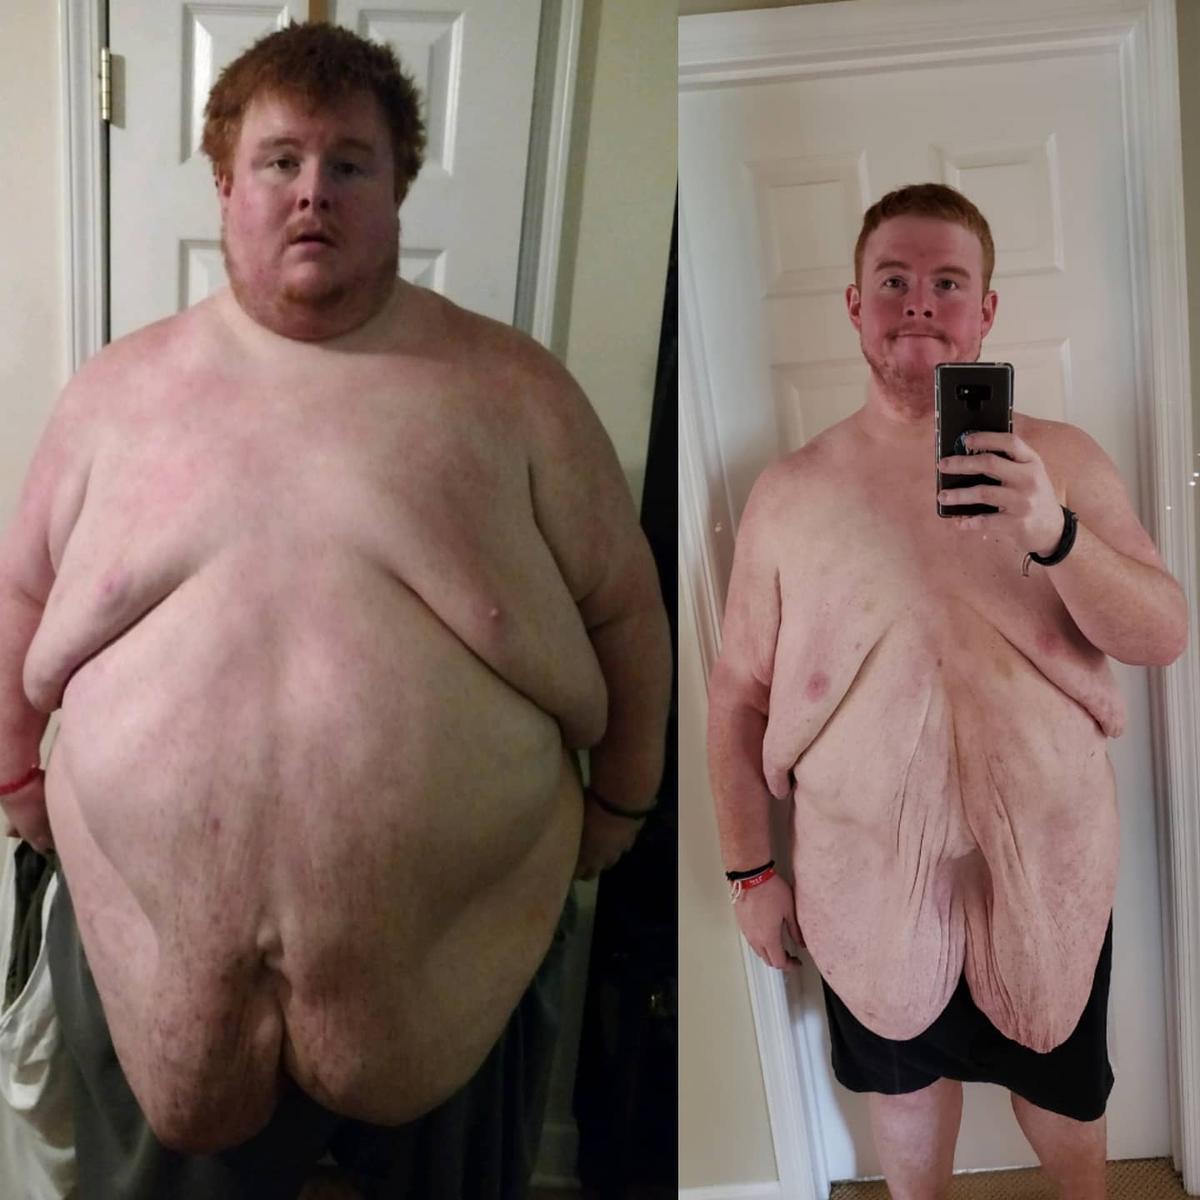 Before and after photos show a shirtless Casey King during different stages of his weight loss program. (Courtesy of <a href="https://www.instagram.com/_caseyking_/">Casey King</a>)